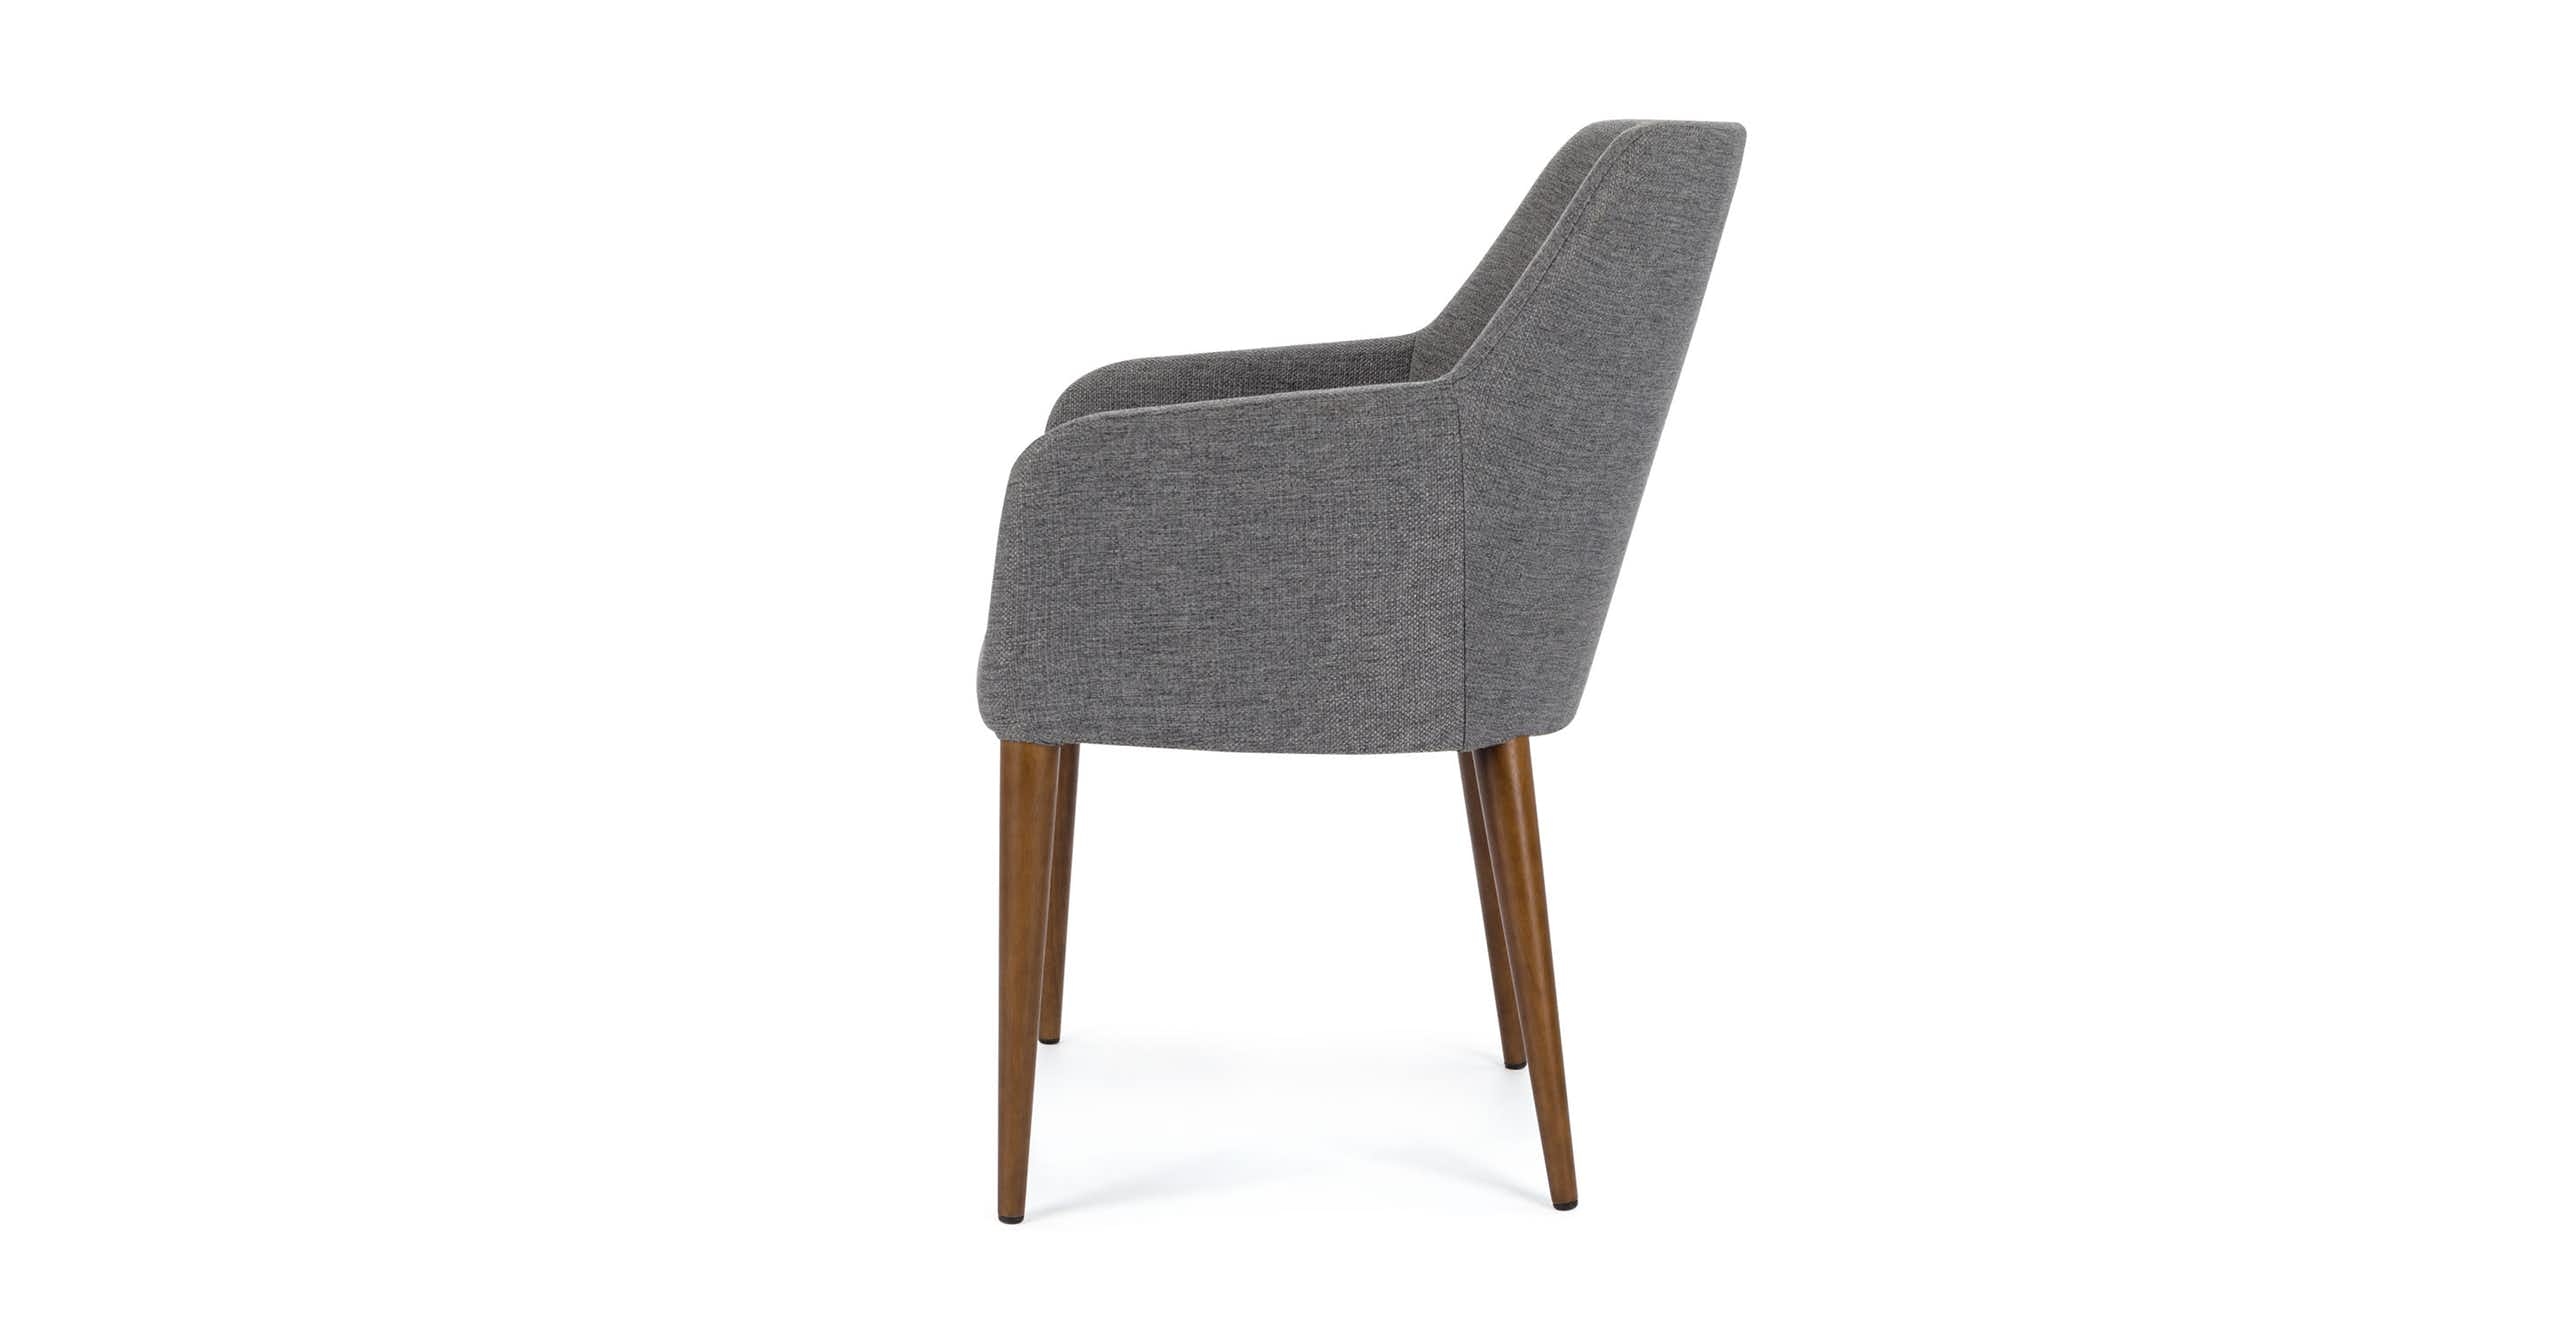 Feast Gravel Gray Dining Chair - Image 1